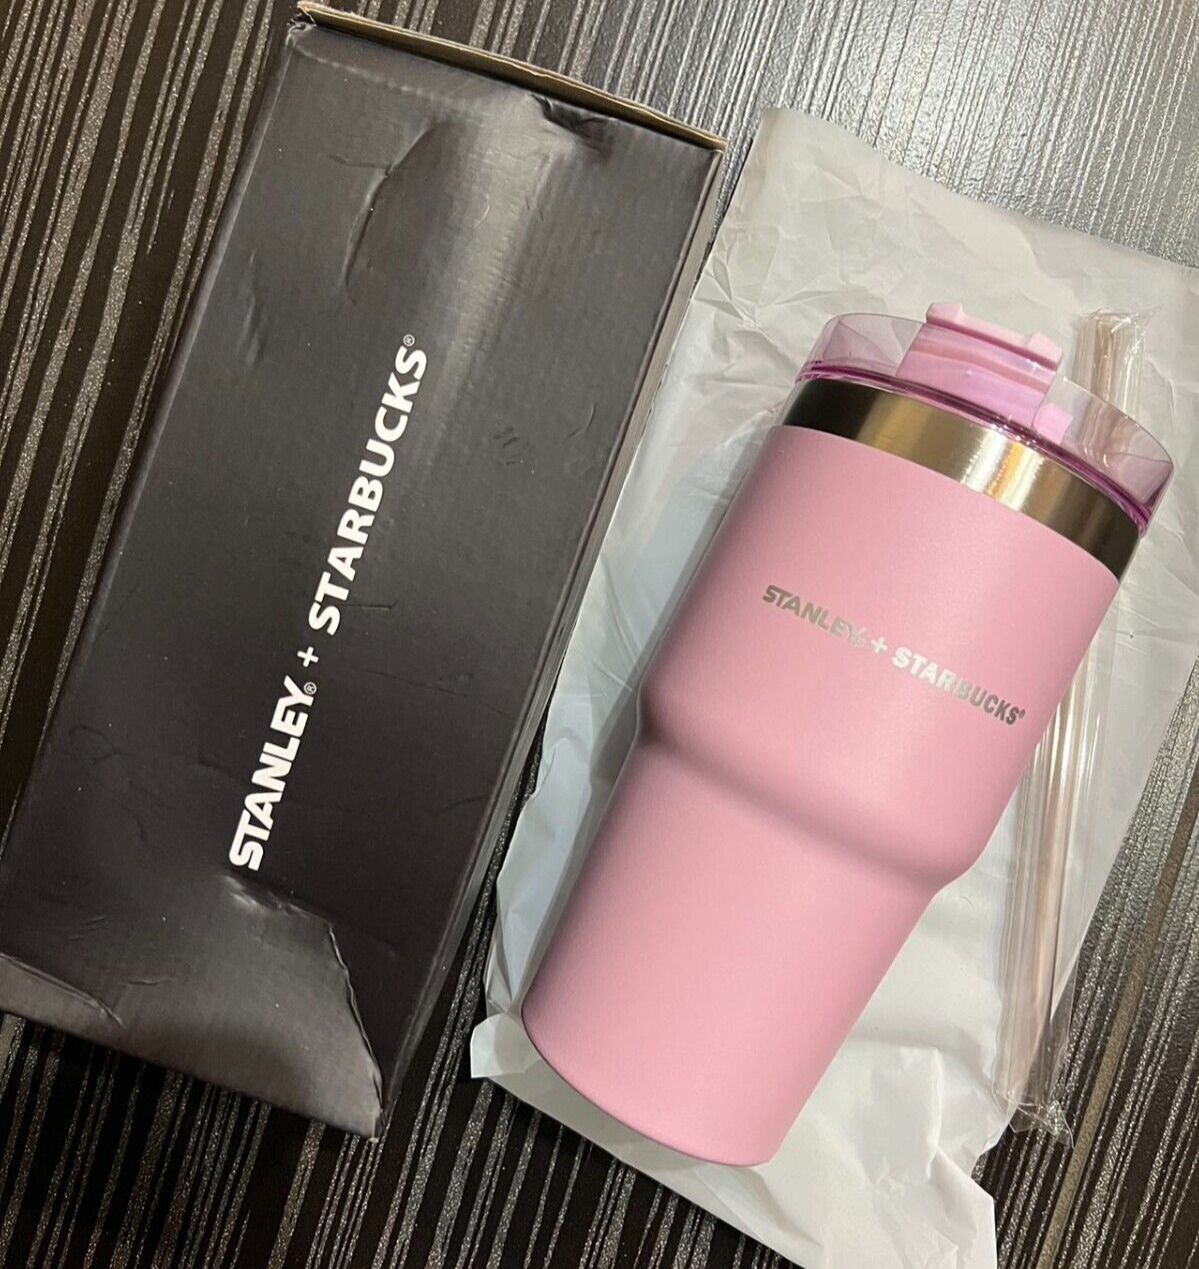 Starbucks Stanley Stainless Steel Vacuum Car Hold Straw Cup Tumbler 20oz Pink